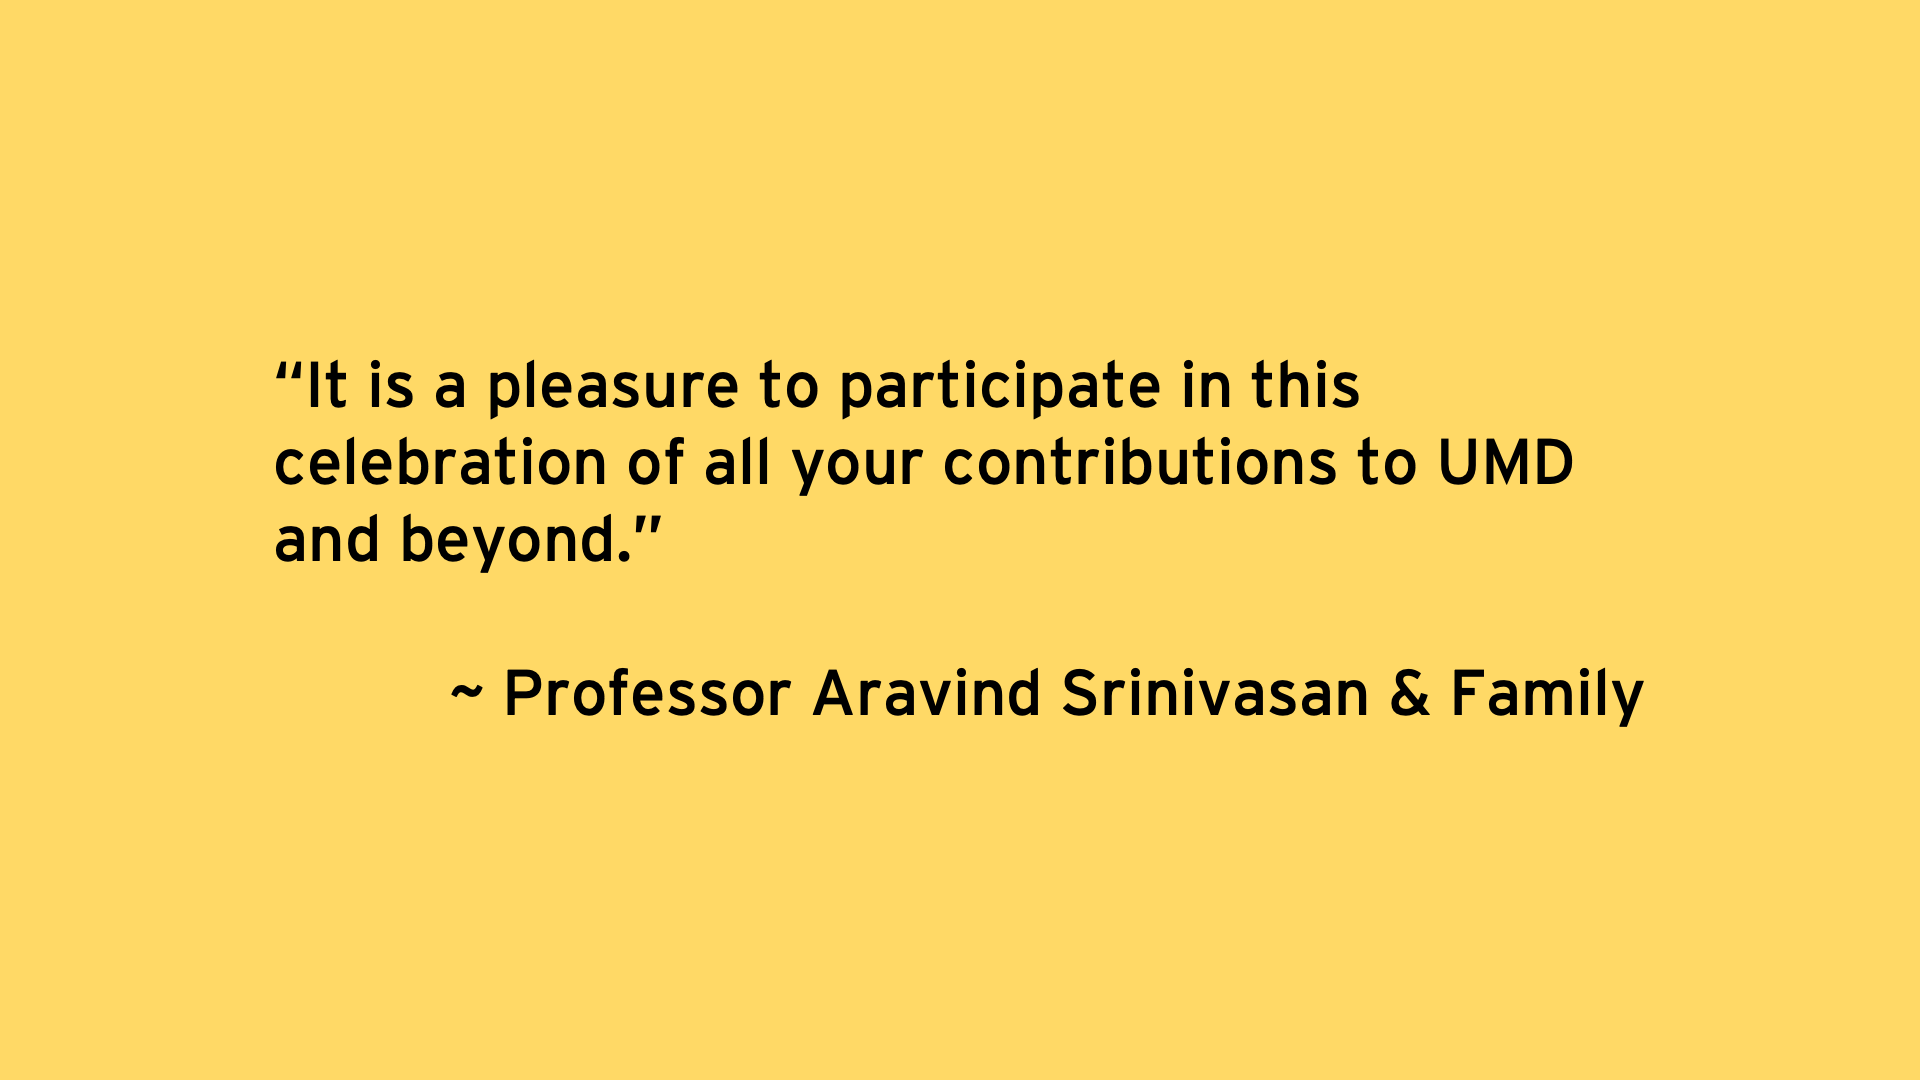 It is a pleasure to participate in this celebration of all your contributions to UMD and beyond. - Professor Aravind Srinivasan & Family